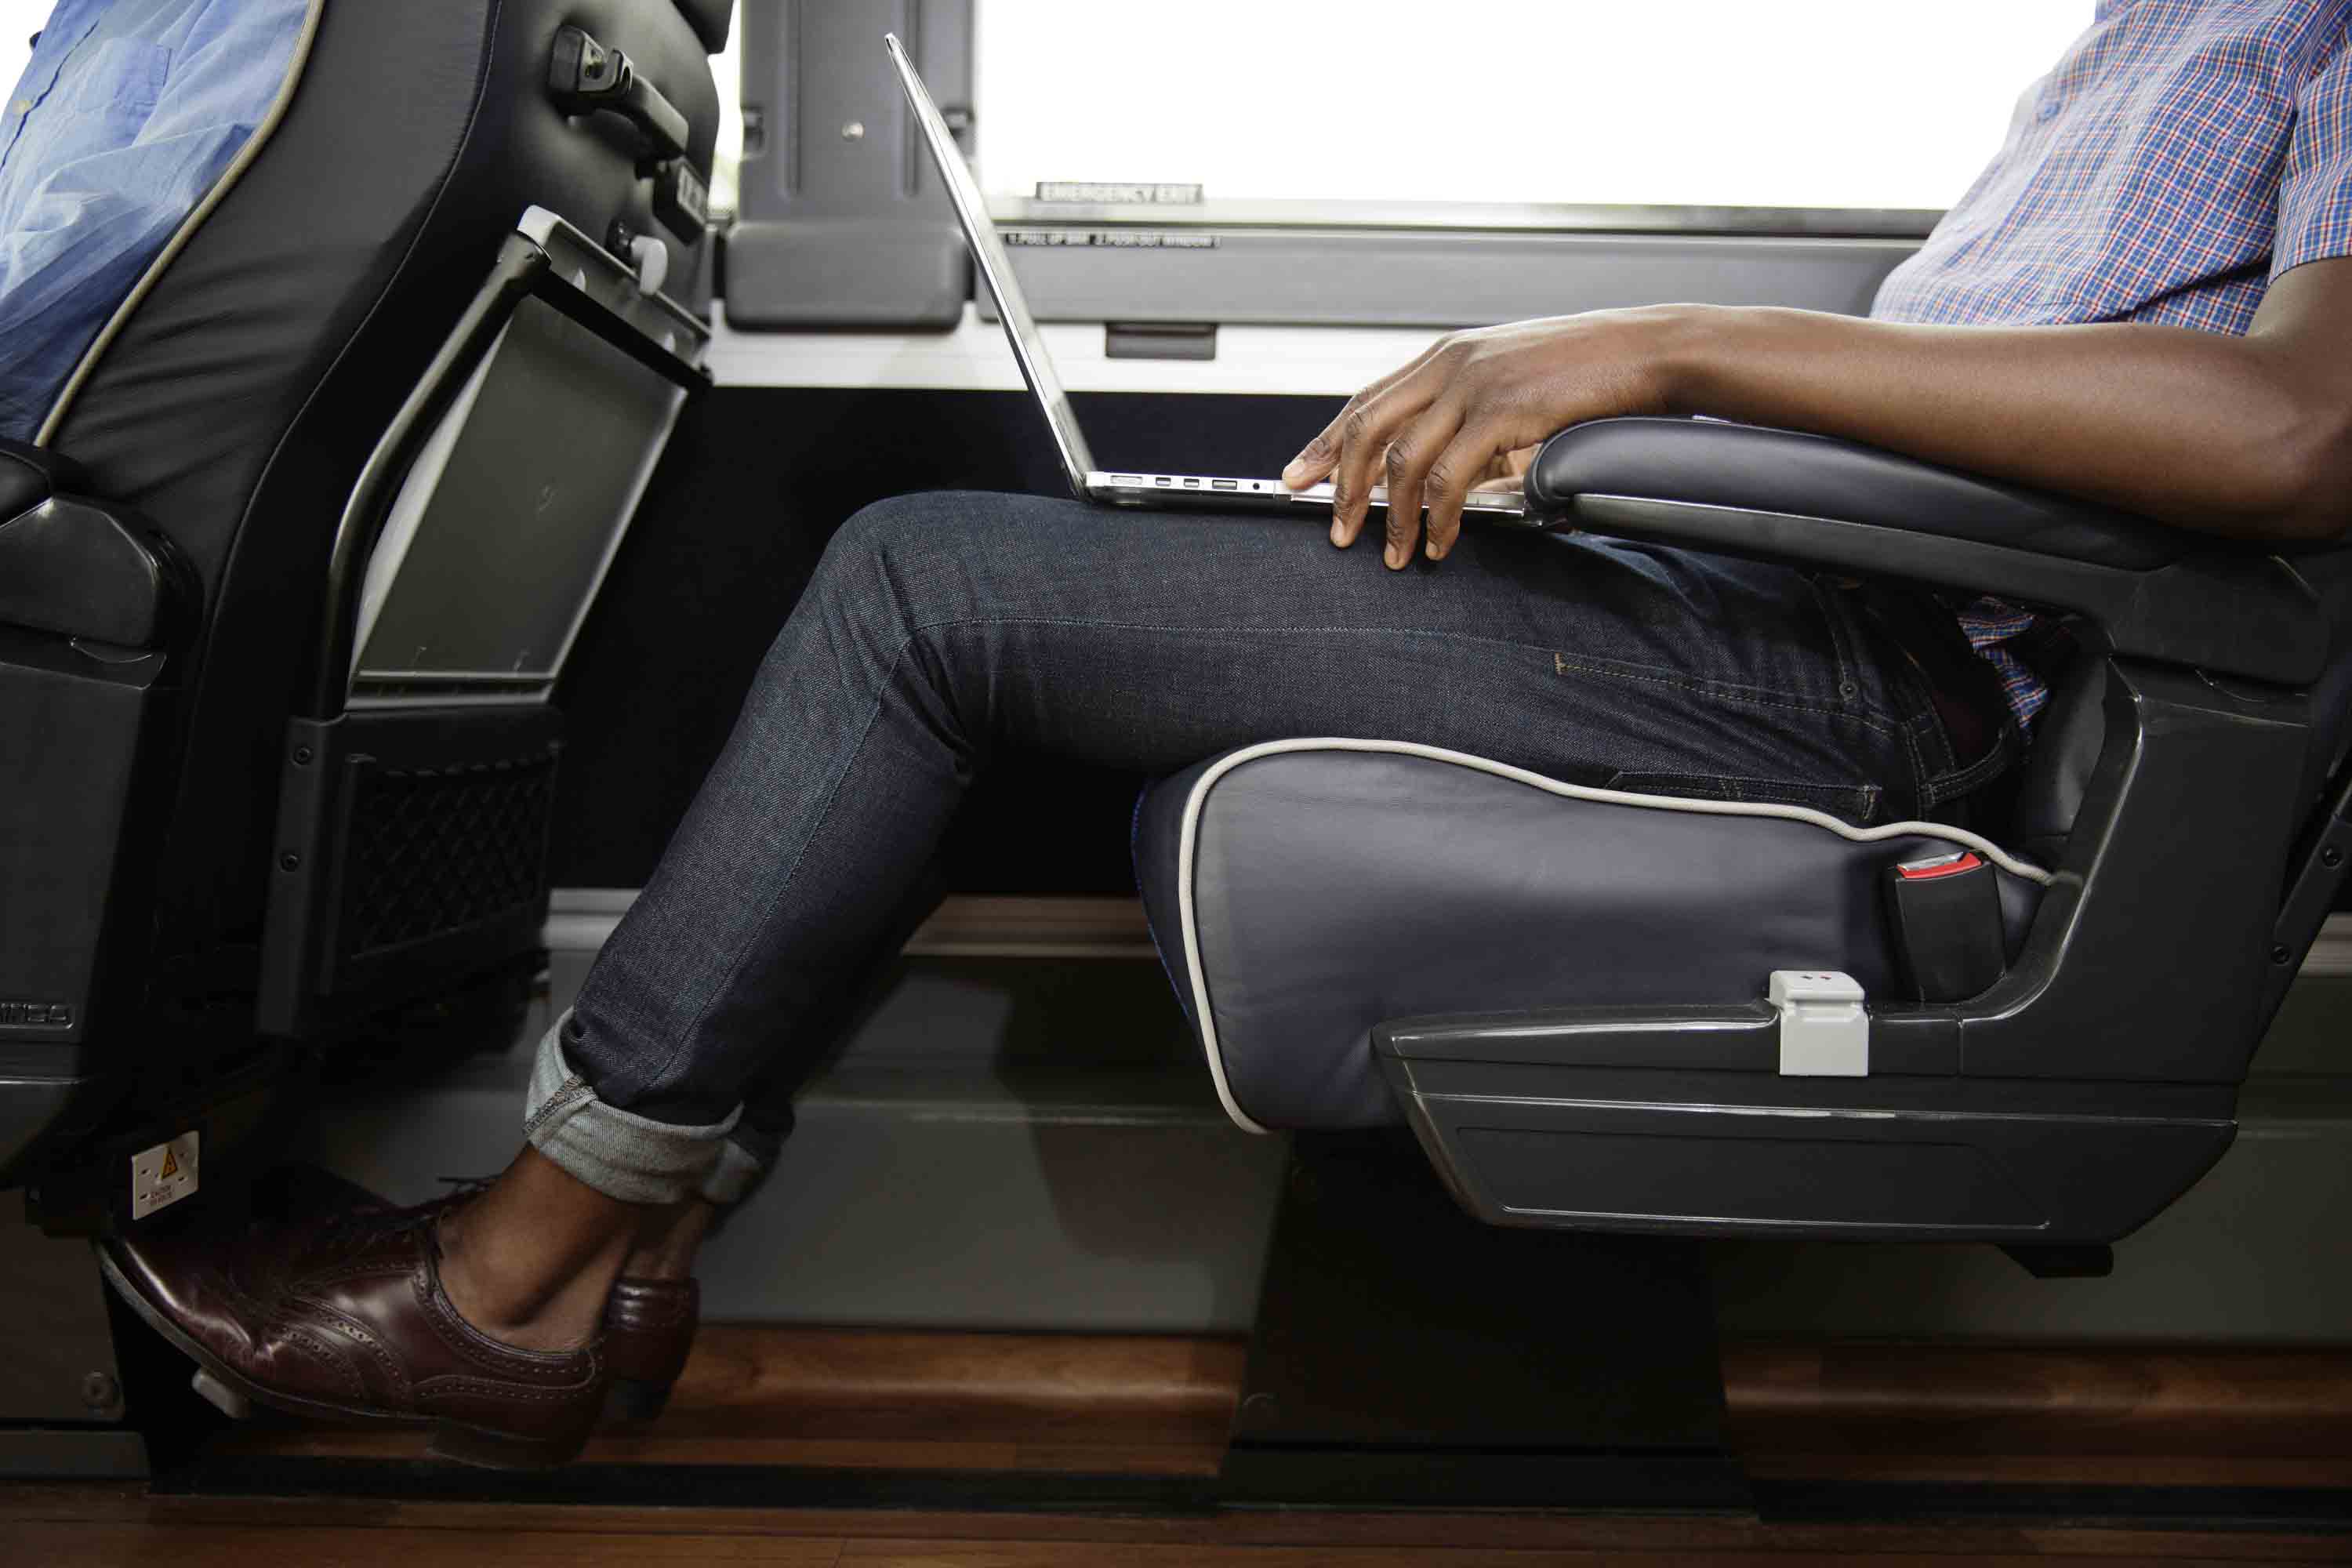 Leg Room and laptop